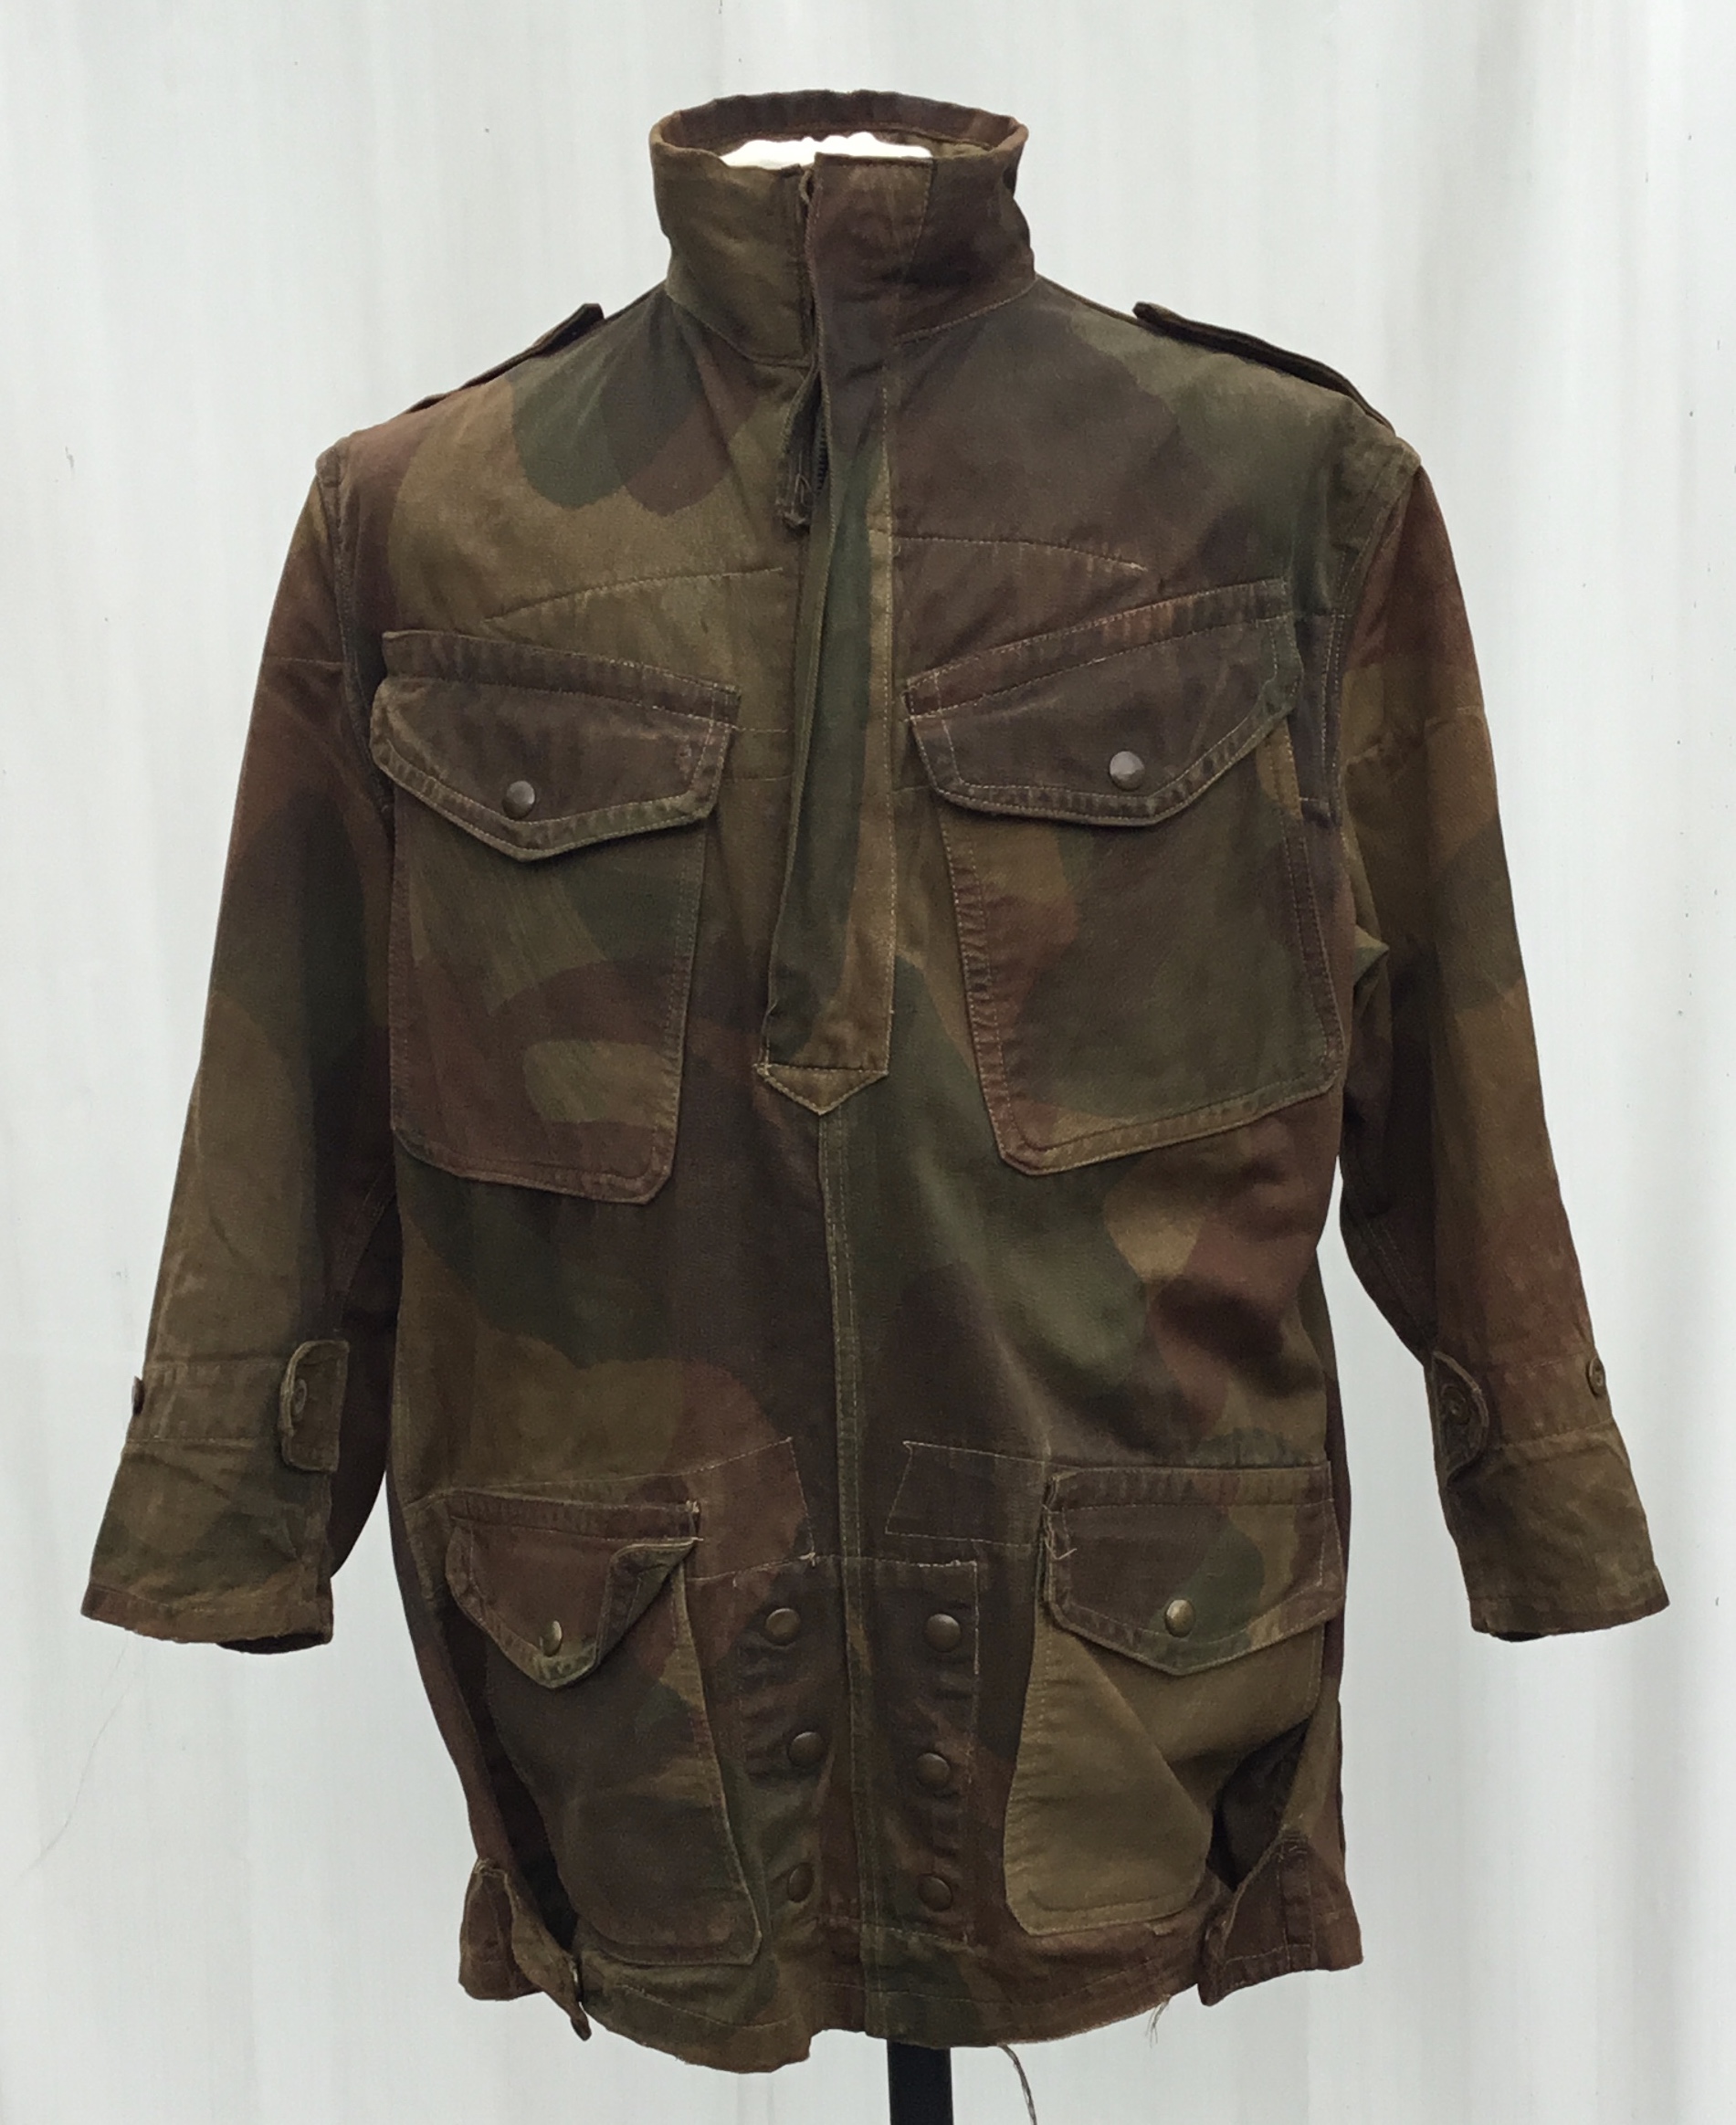 A WW2 era 1945 dated ‘Denison’ airborne paratrooper’s smock. Made from heavy duty, windproof